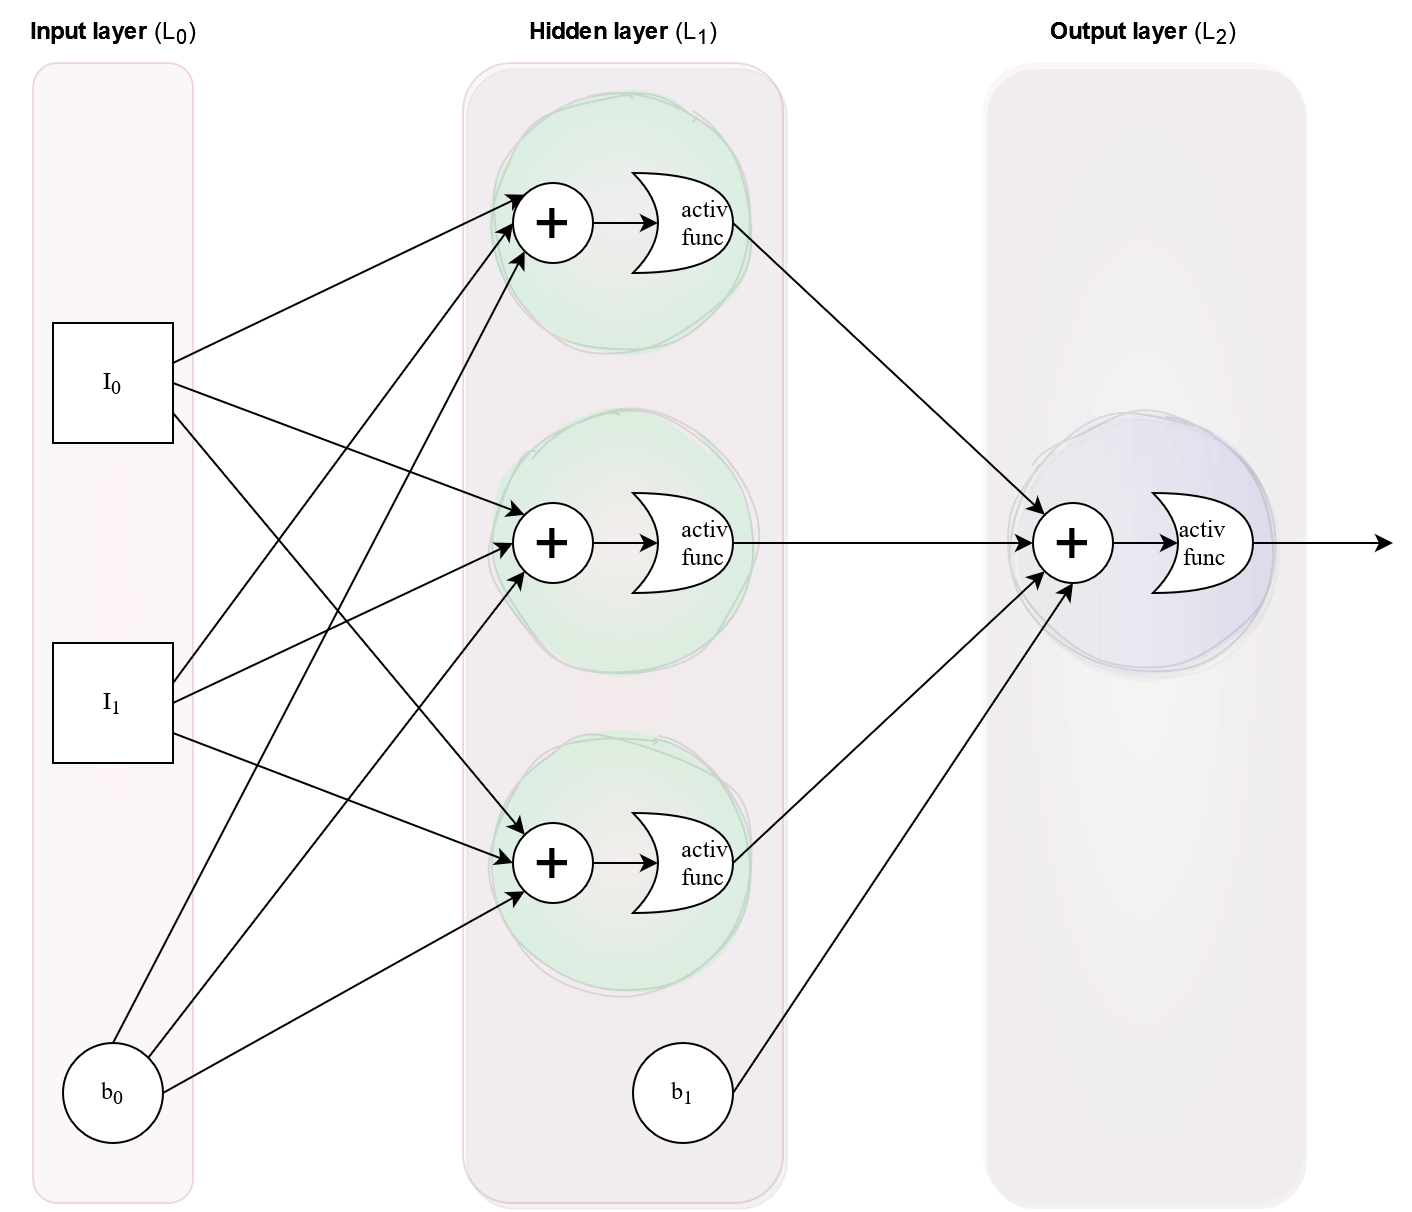 Implementing Backpropagation in Python: Building a Neural Network from Scratch